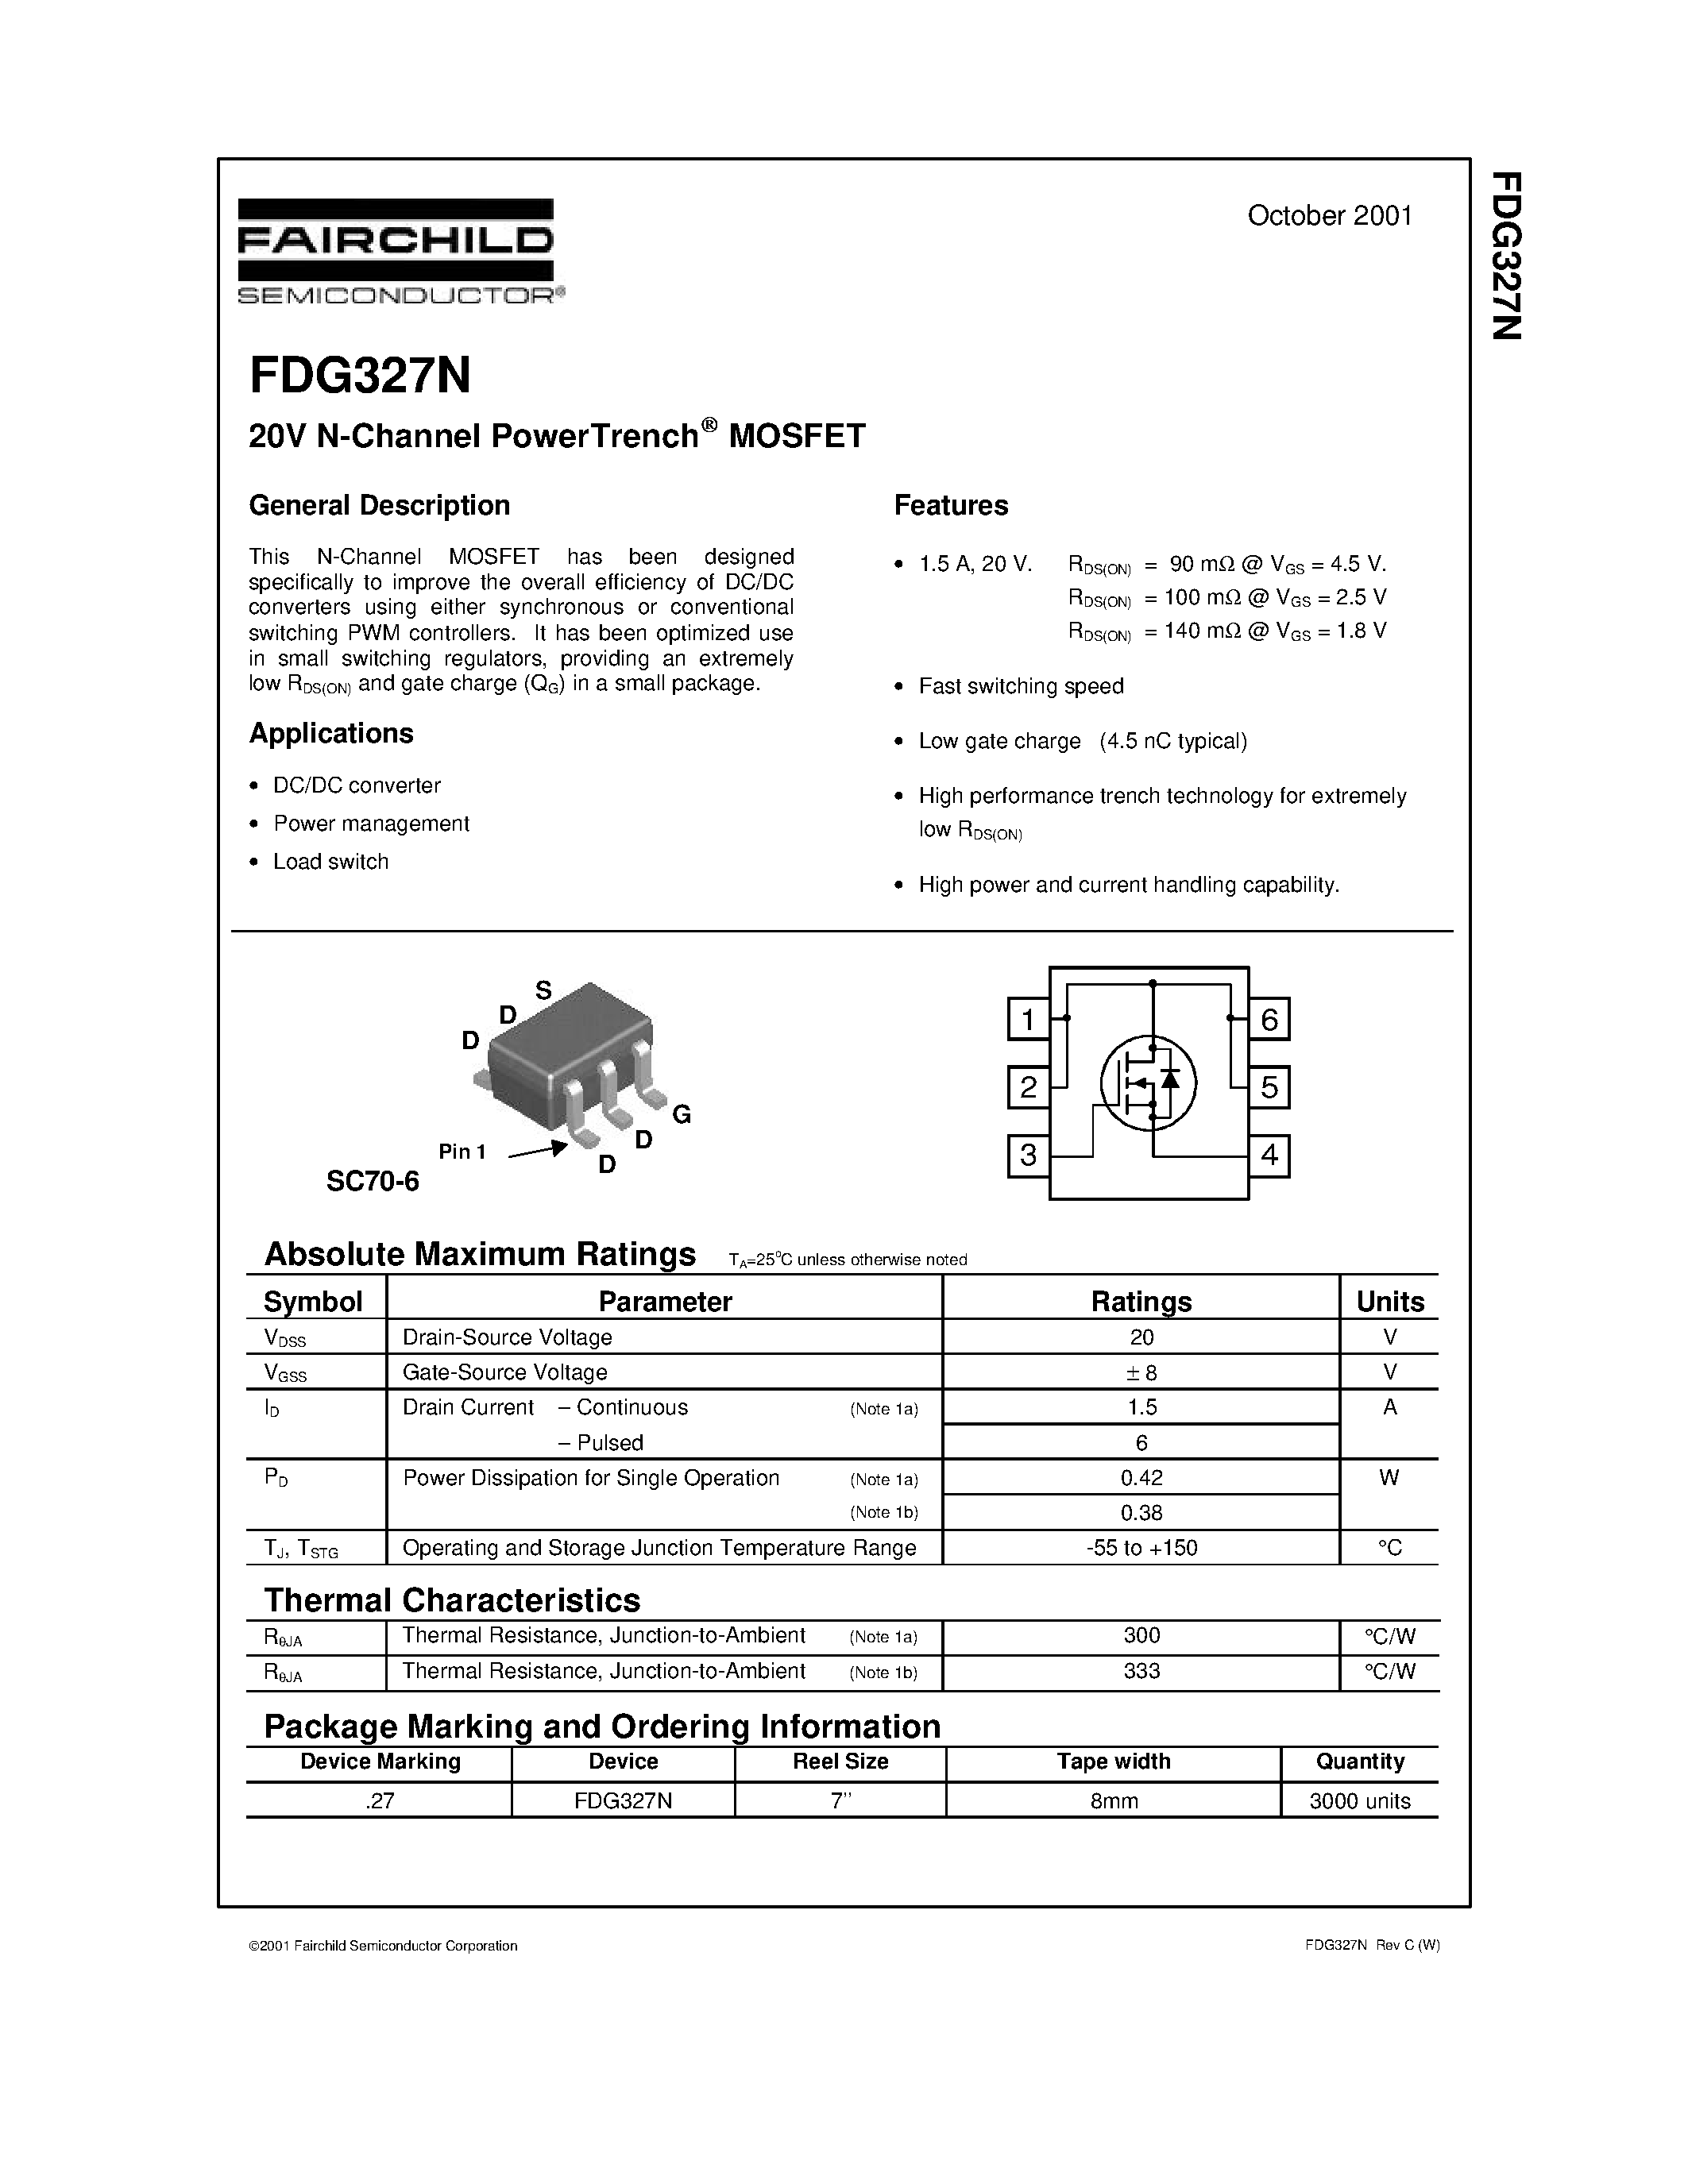 Datasheet FDG327N - 20V N-Channel PowerTrench MOSFET page 1